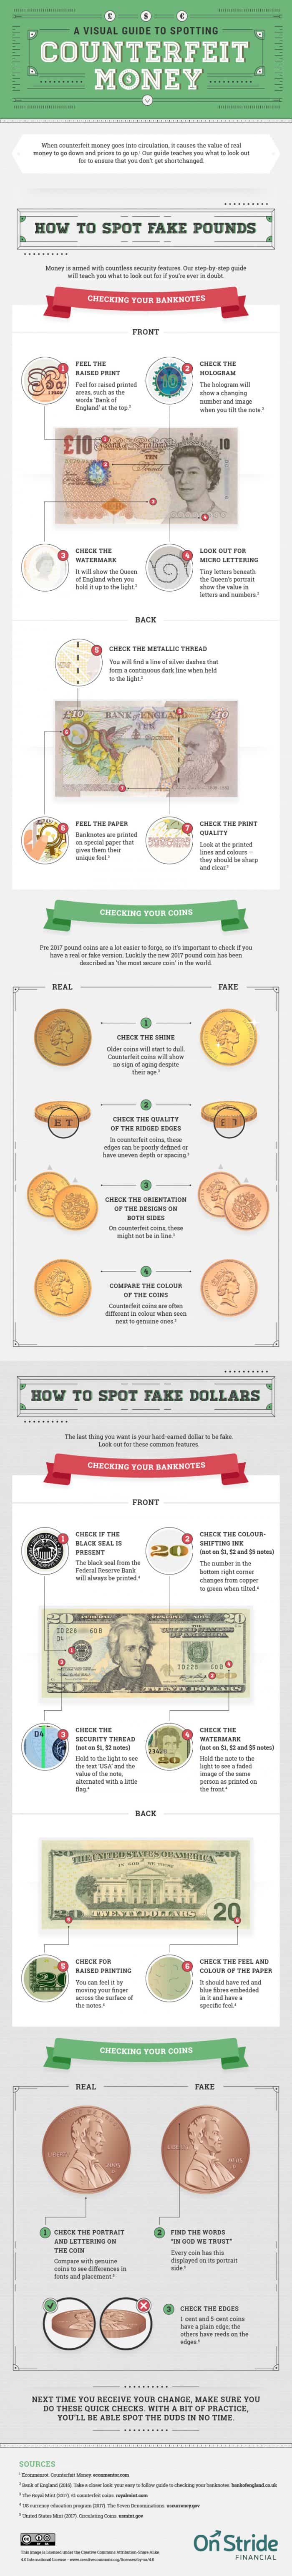 A Visual Guide To Spotting Counterfeit Money